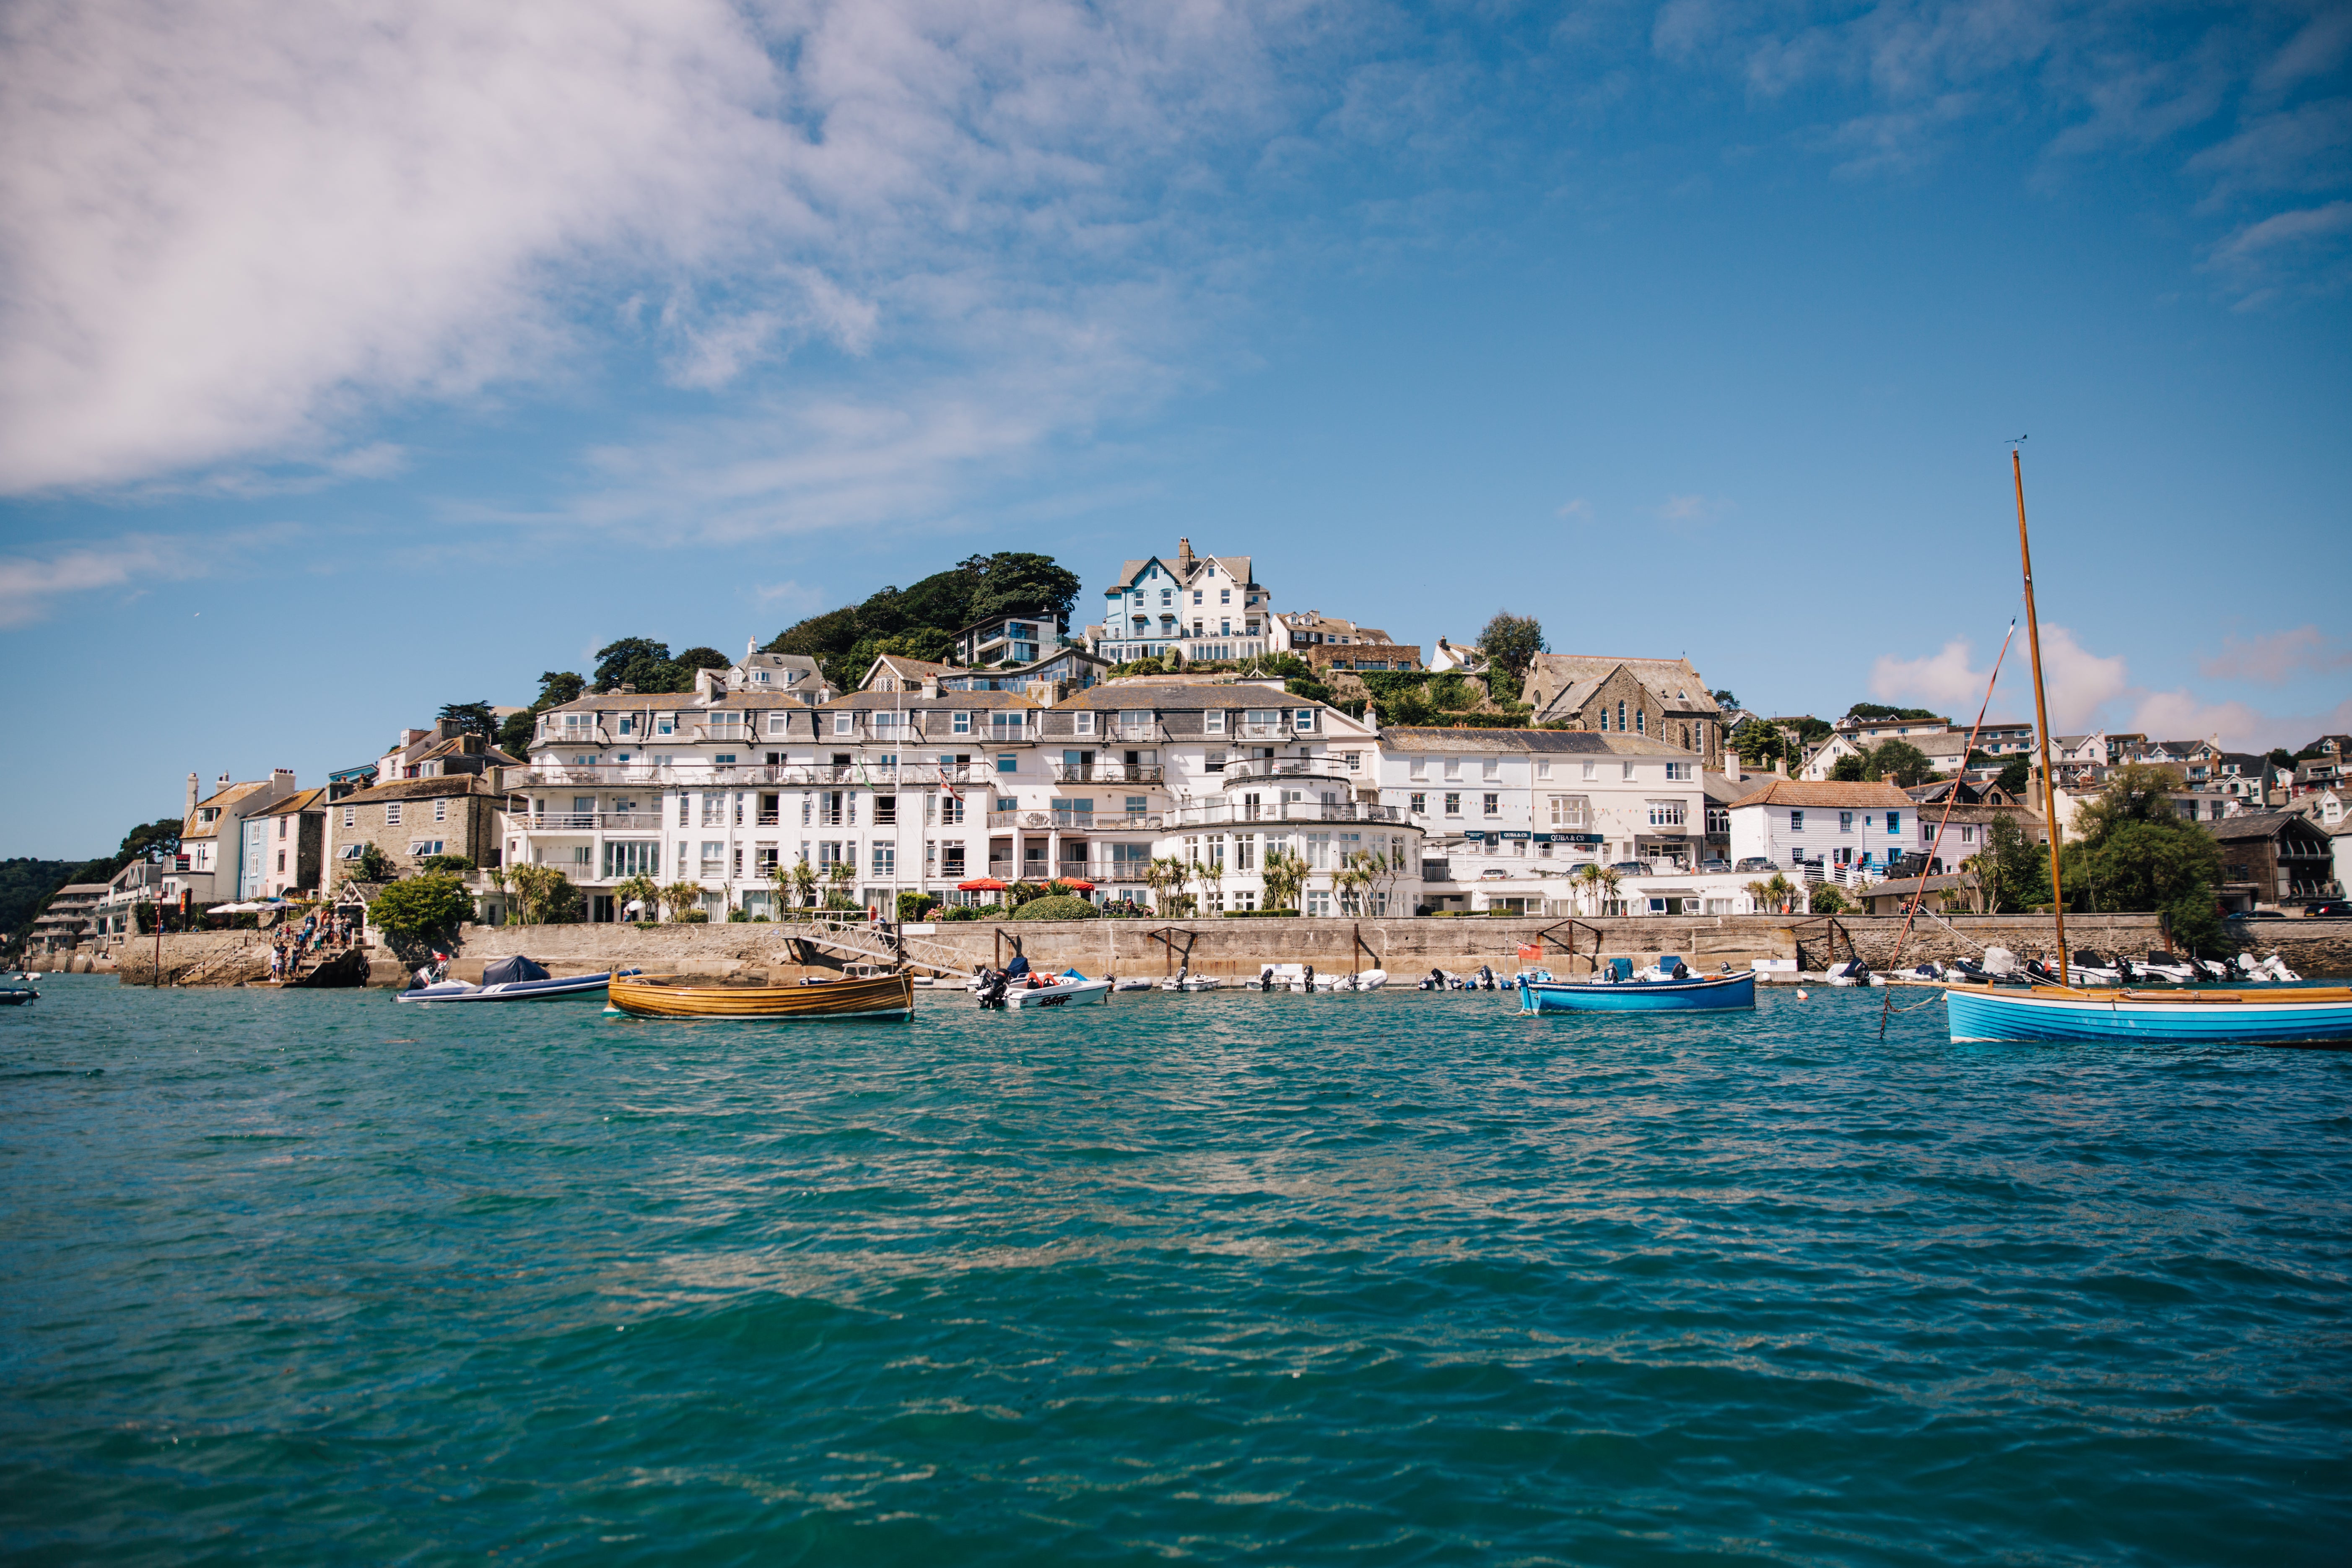 Places like Salcombe have birthed creative new distilleries